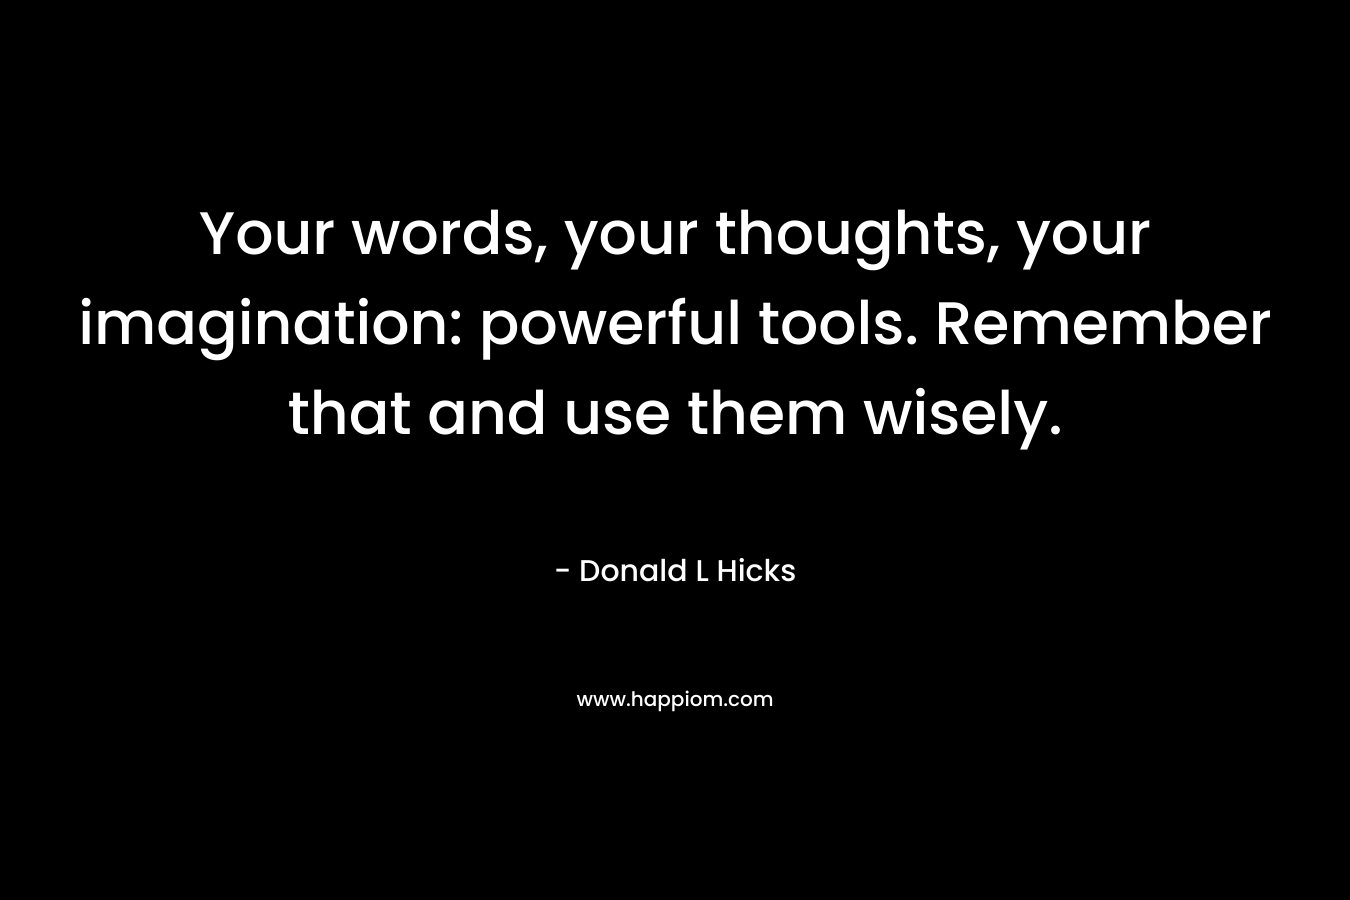 Your words, your thoughts, your imagination: powerful tools. Remember that and use them wisely.